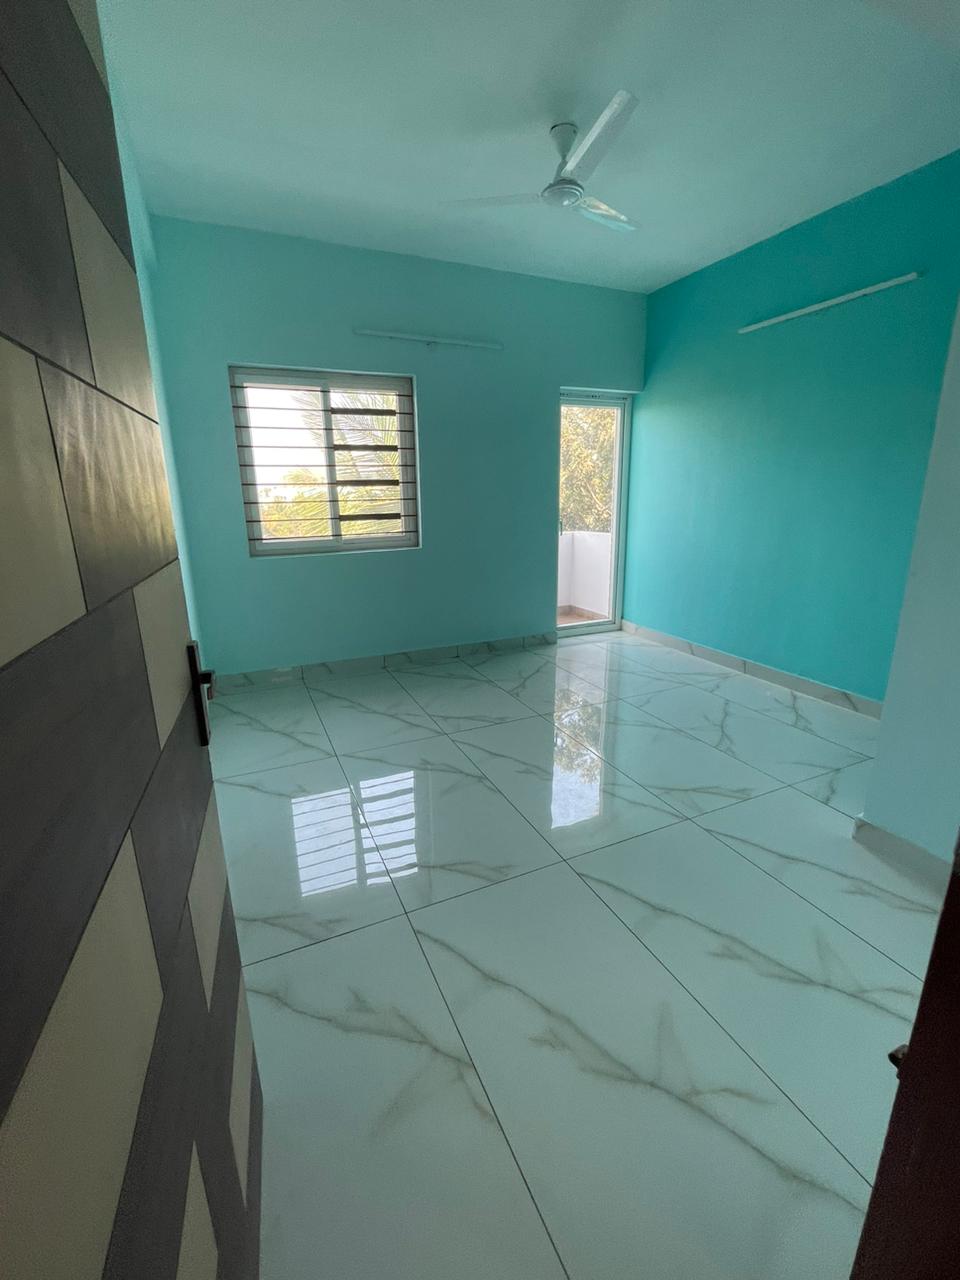 3 BHK Residential Apartment for Lease Only at JAML2 - 3571-32lakh in Thanisandra